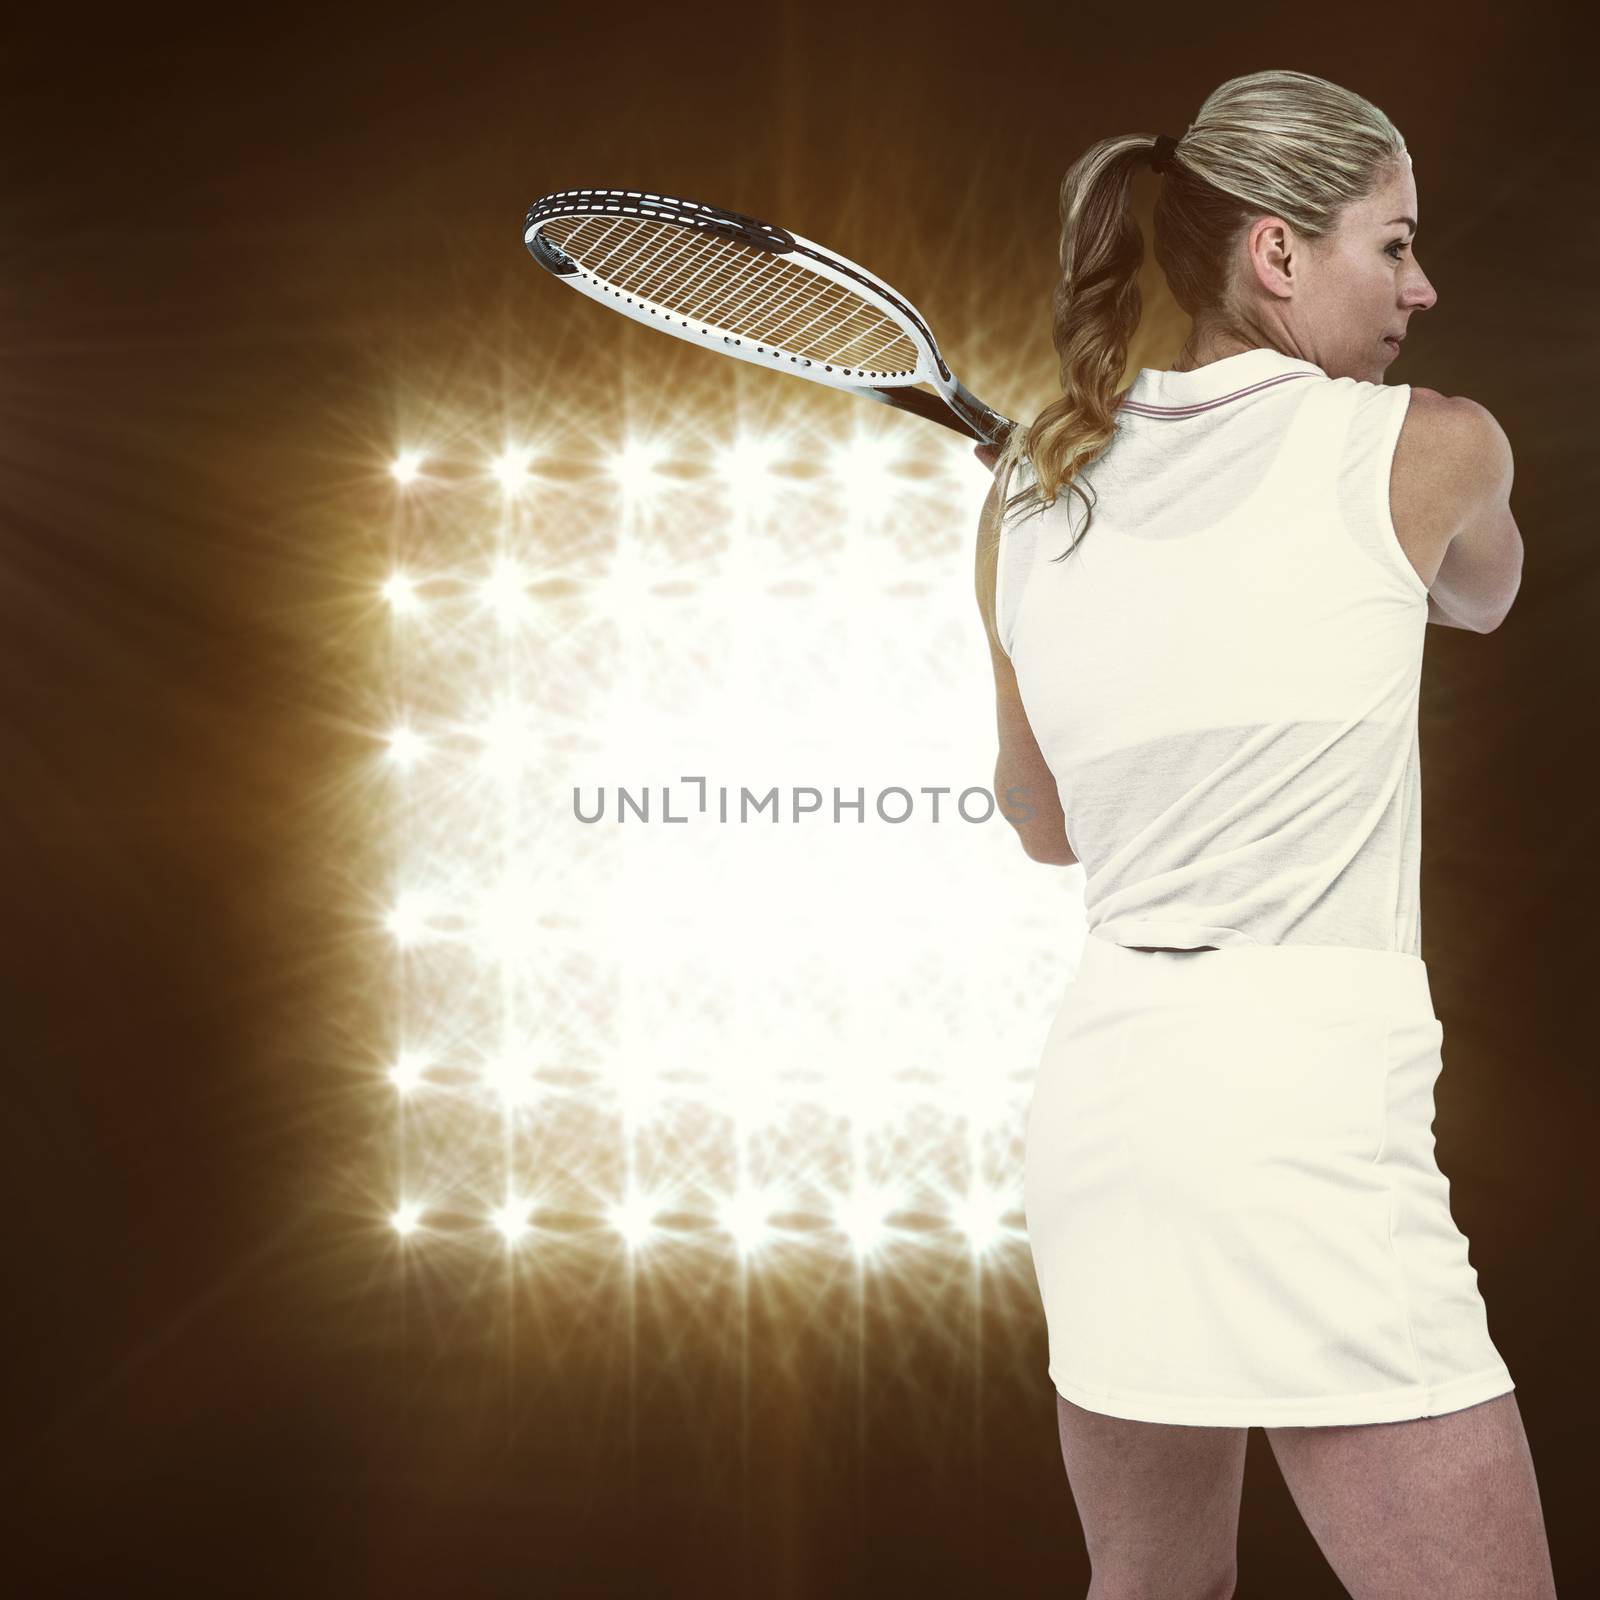 Composite image of athlete playing tennis with a racket  by Wavebreakmedia